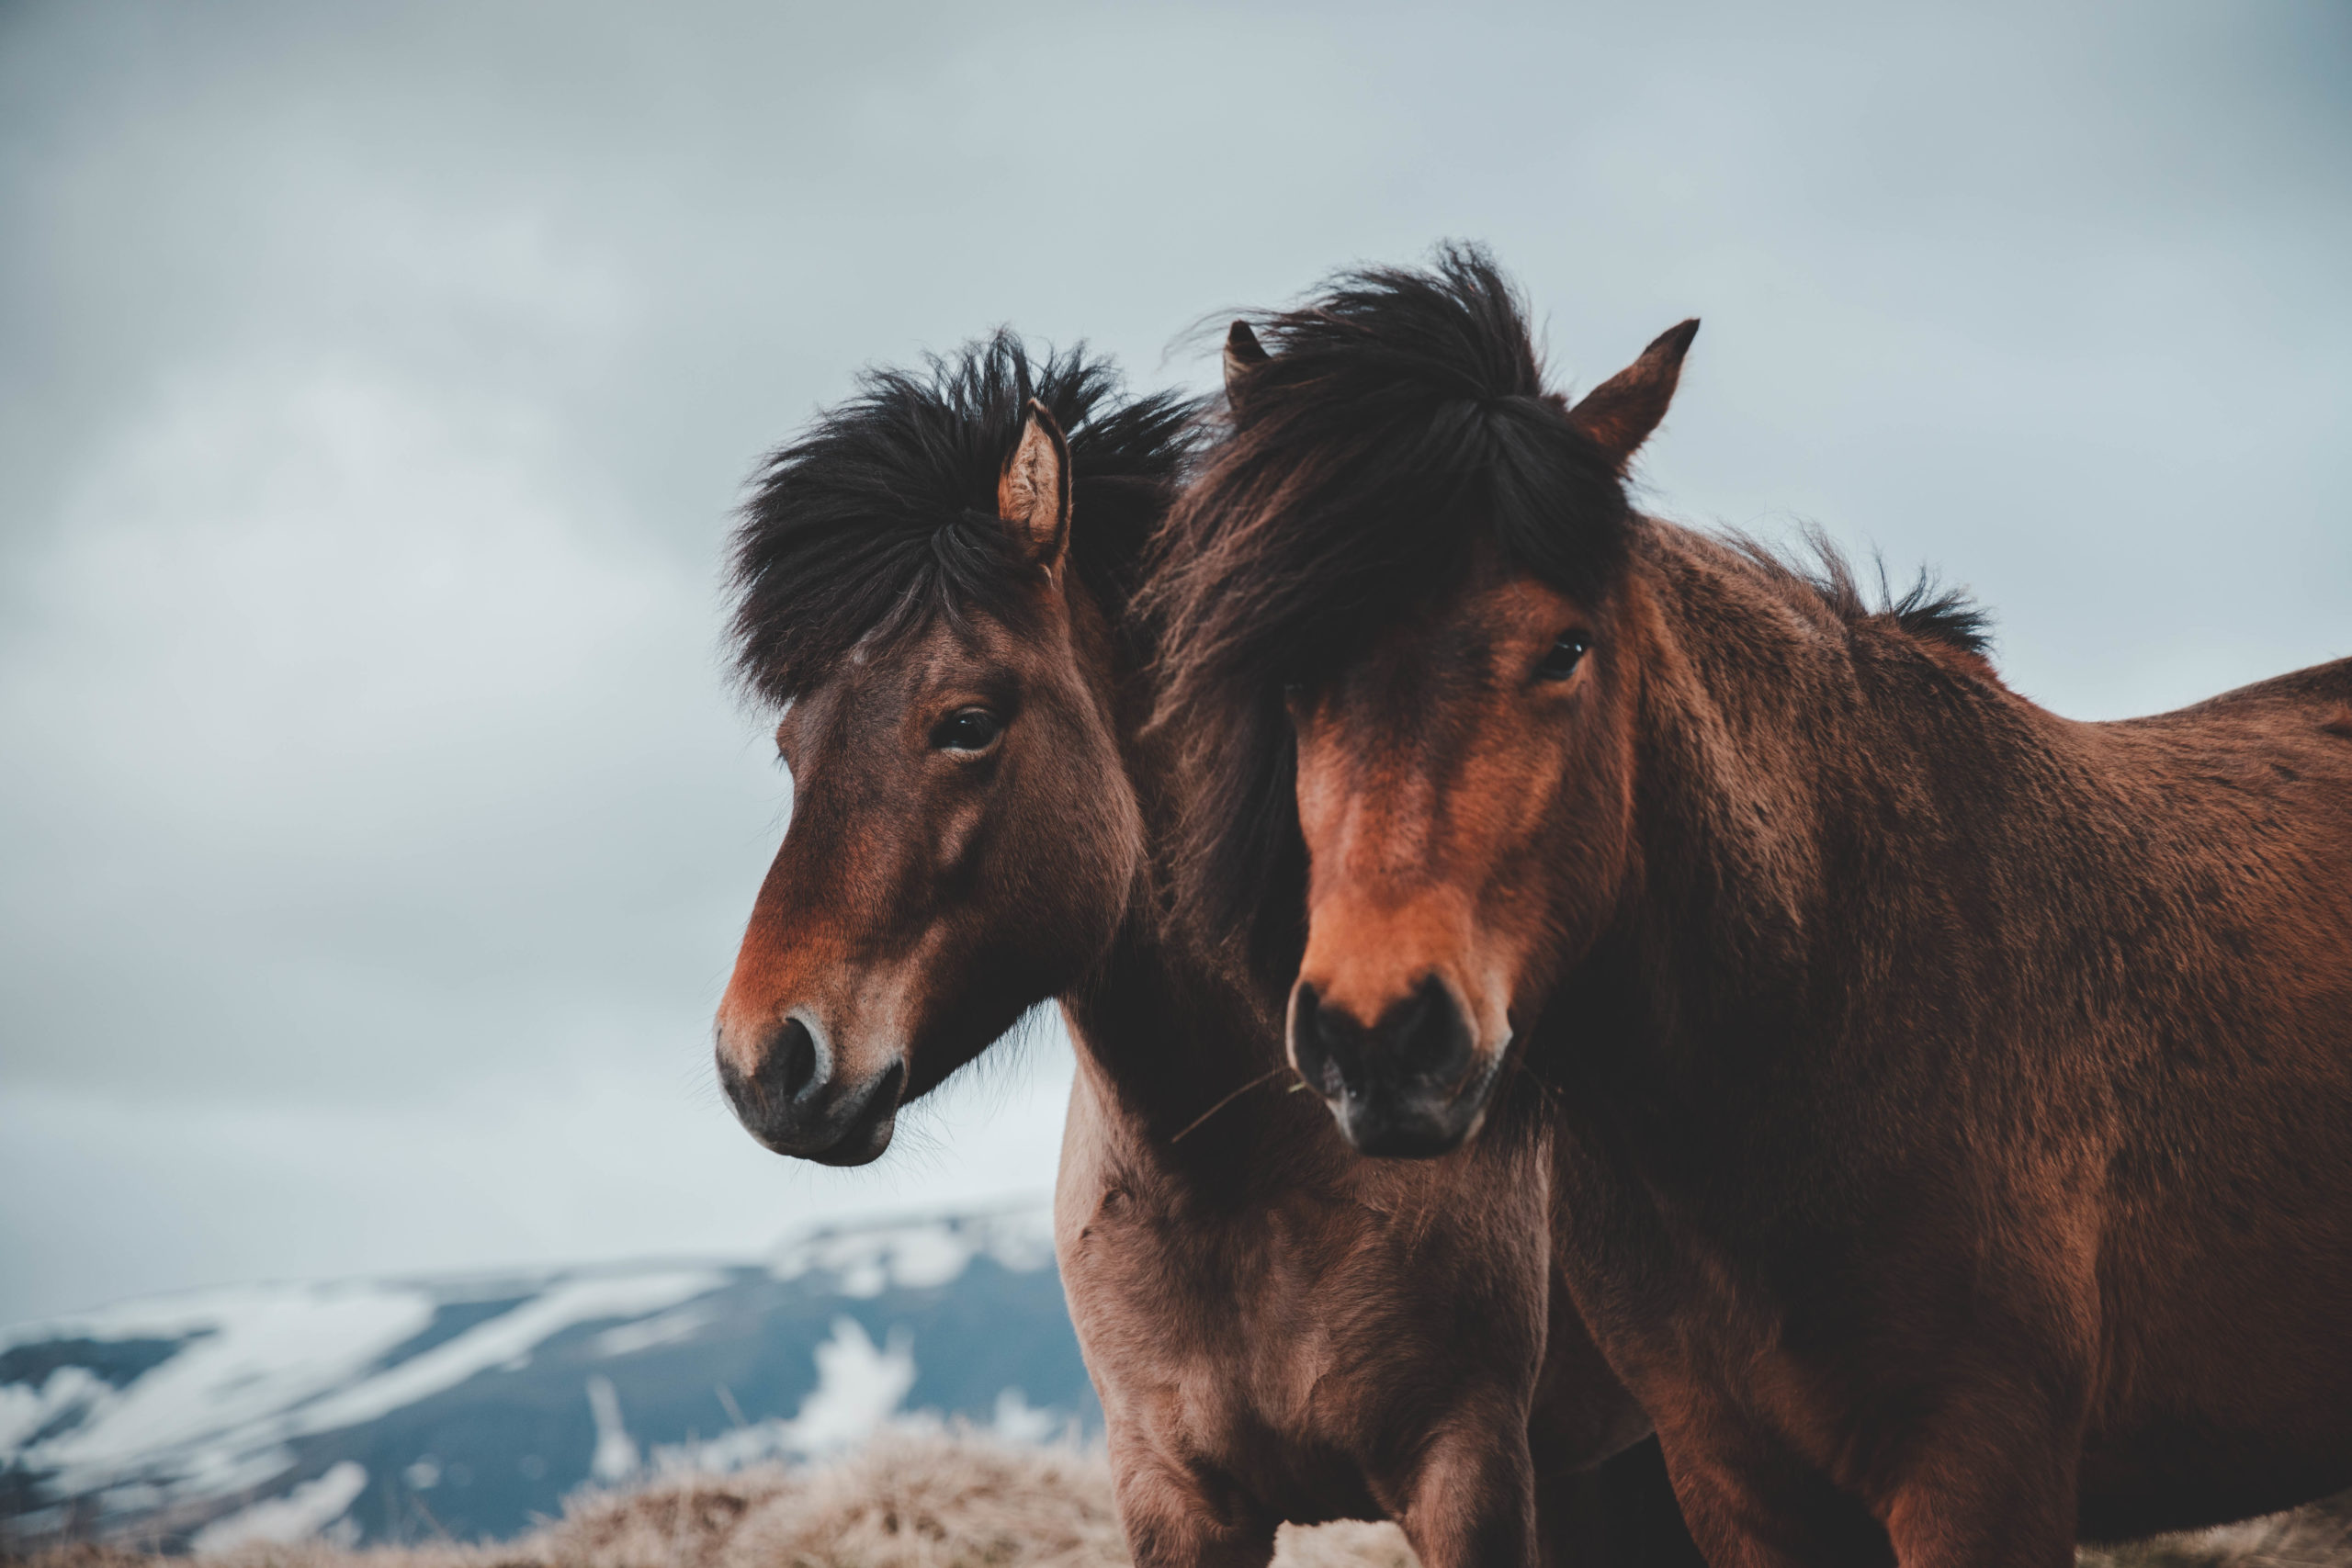 Horses in Iceland